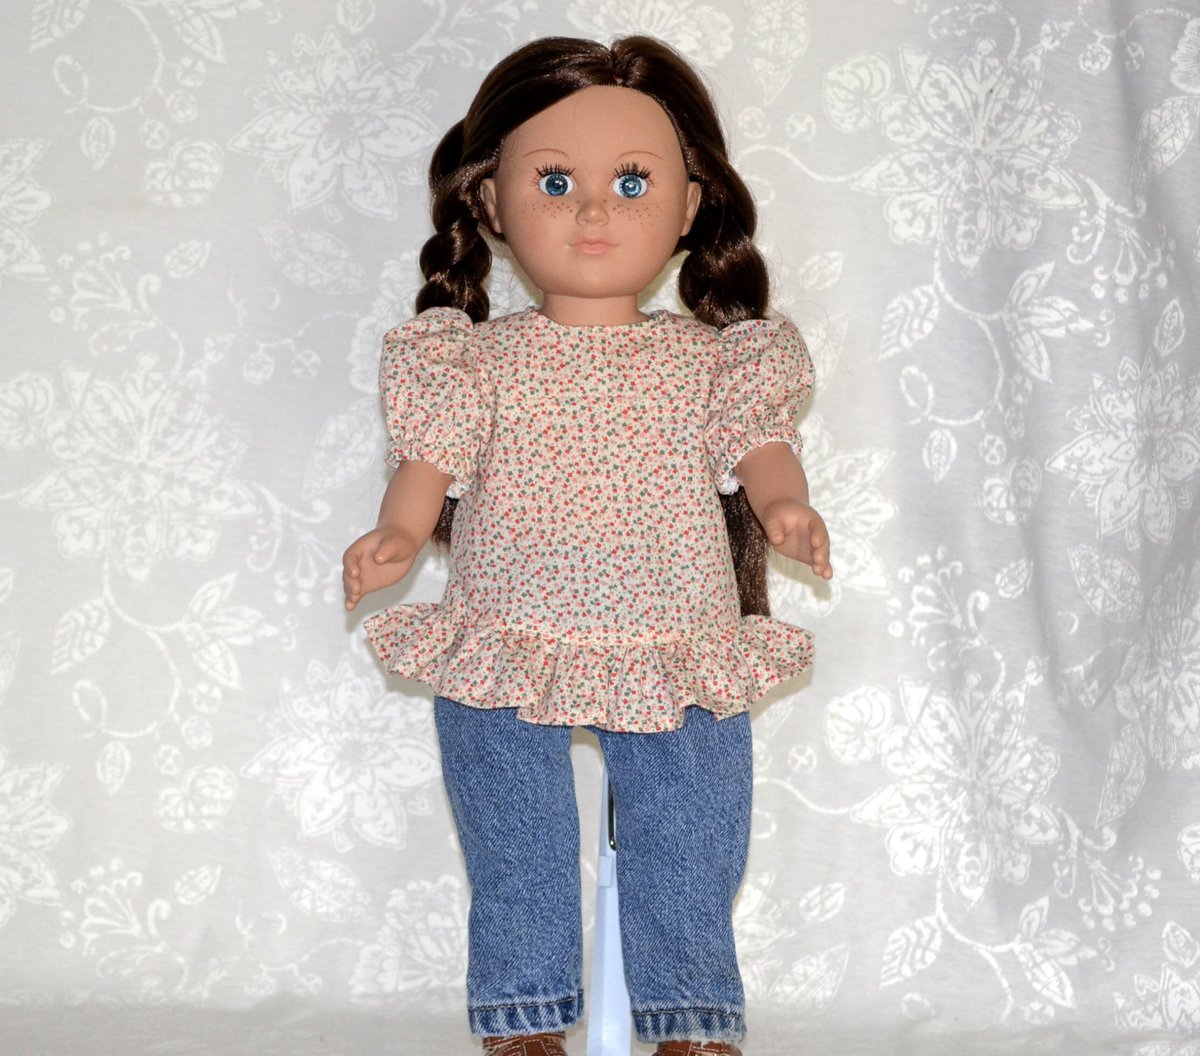 Excited to share the latest addition to my #etsy shop: 18 inch Doll Clothes for American Jean outfit Modern shirt blouse etsy.me/3GbP65a #blue #orange #18inchdoll #americangirl #agdoll #completewithshoes #madamealexander #modernclothes #bluejeans